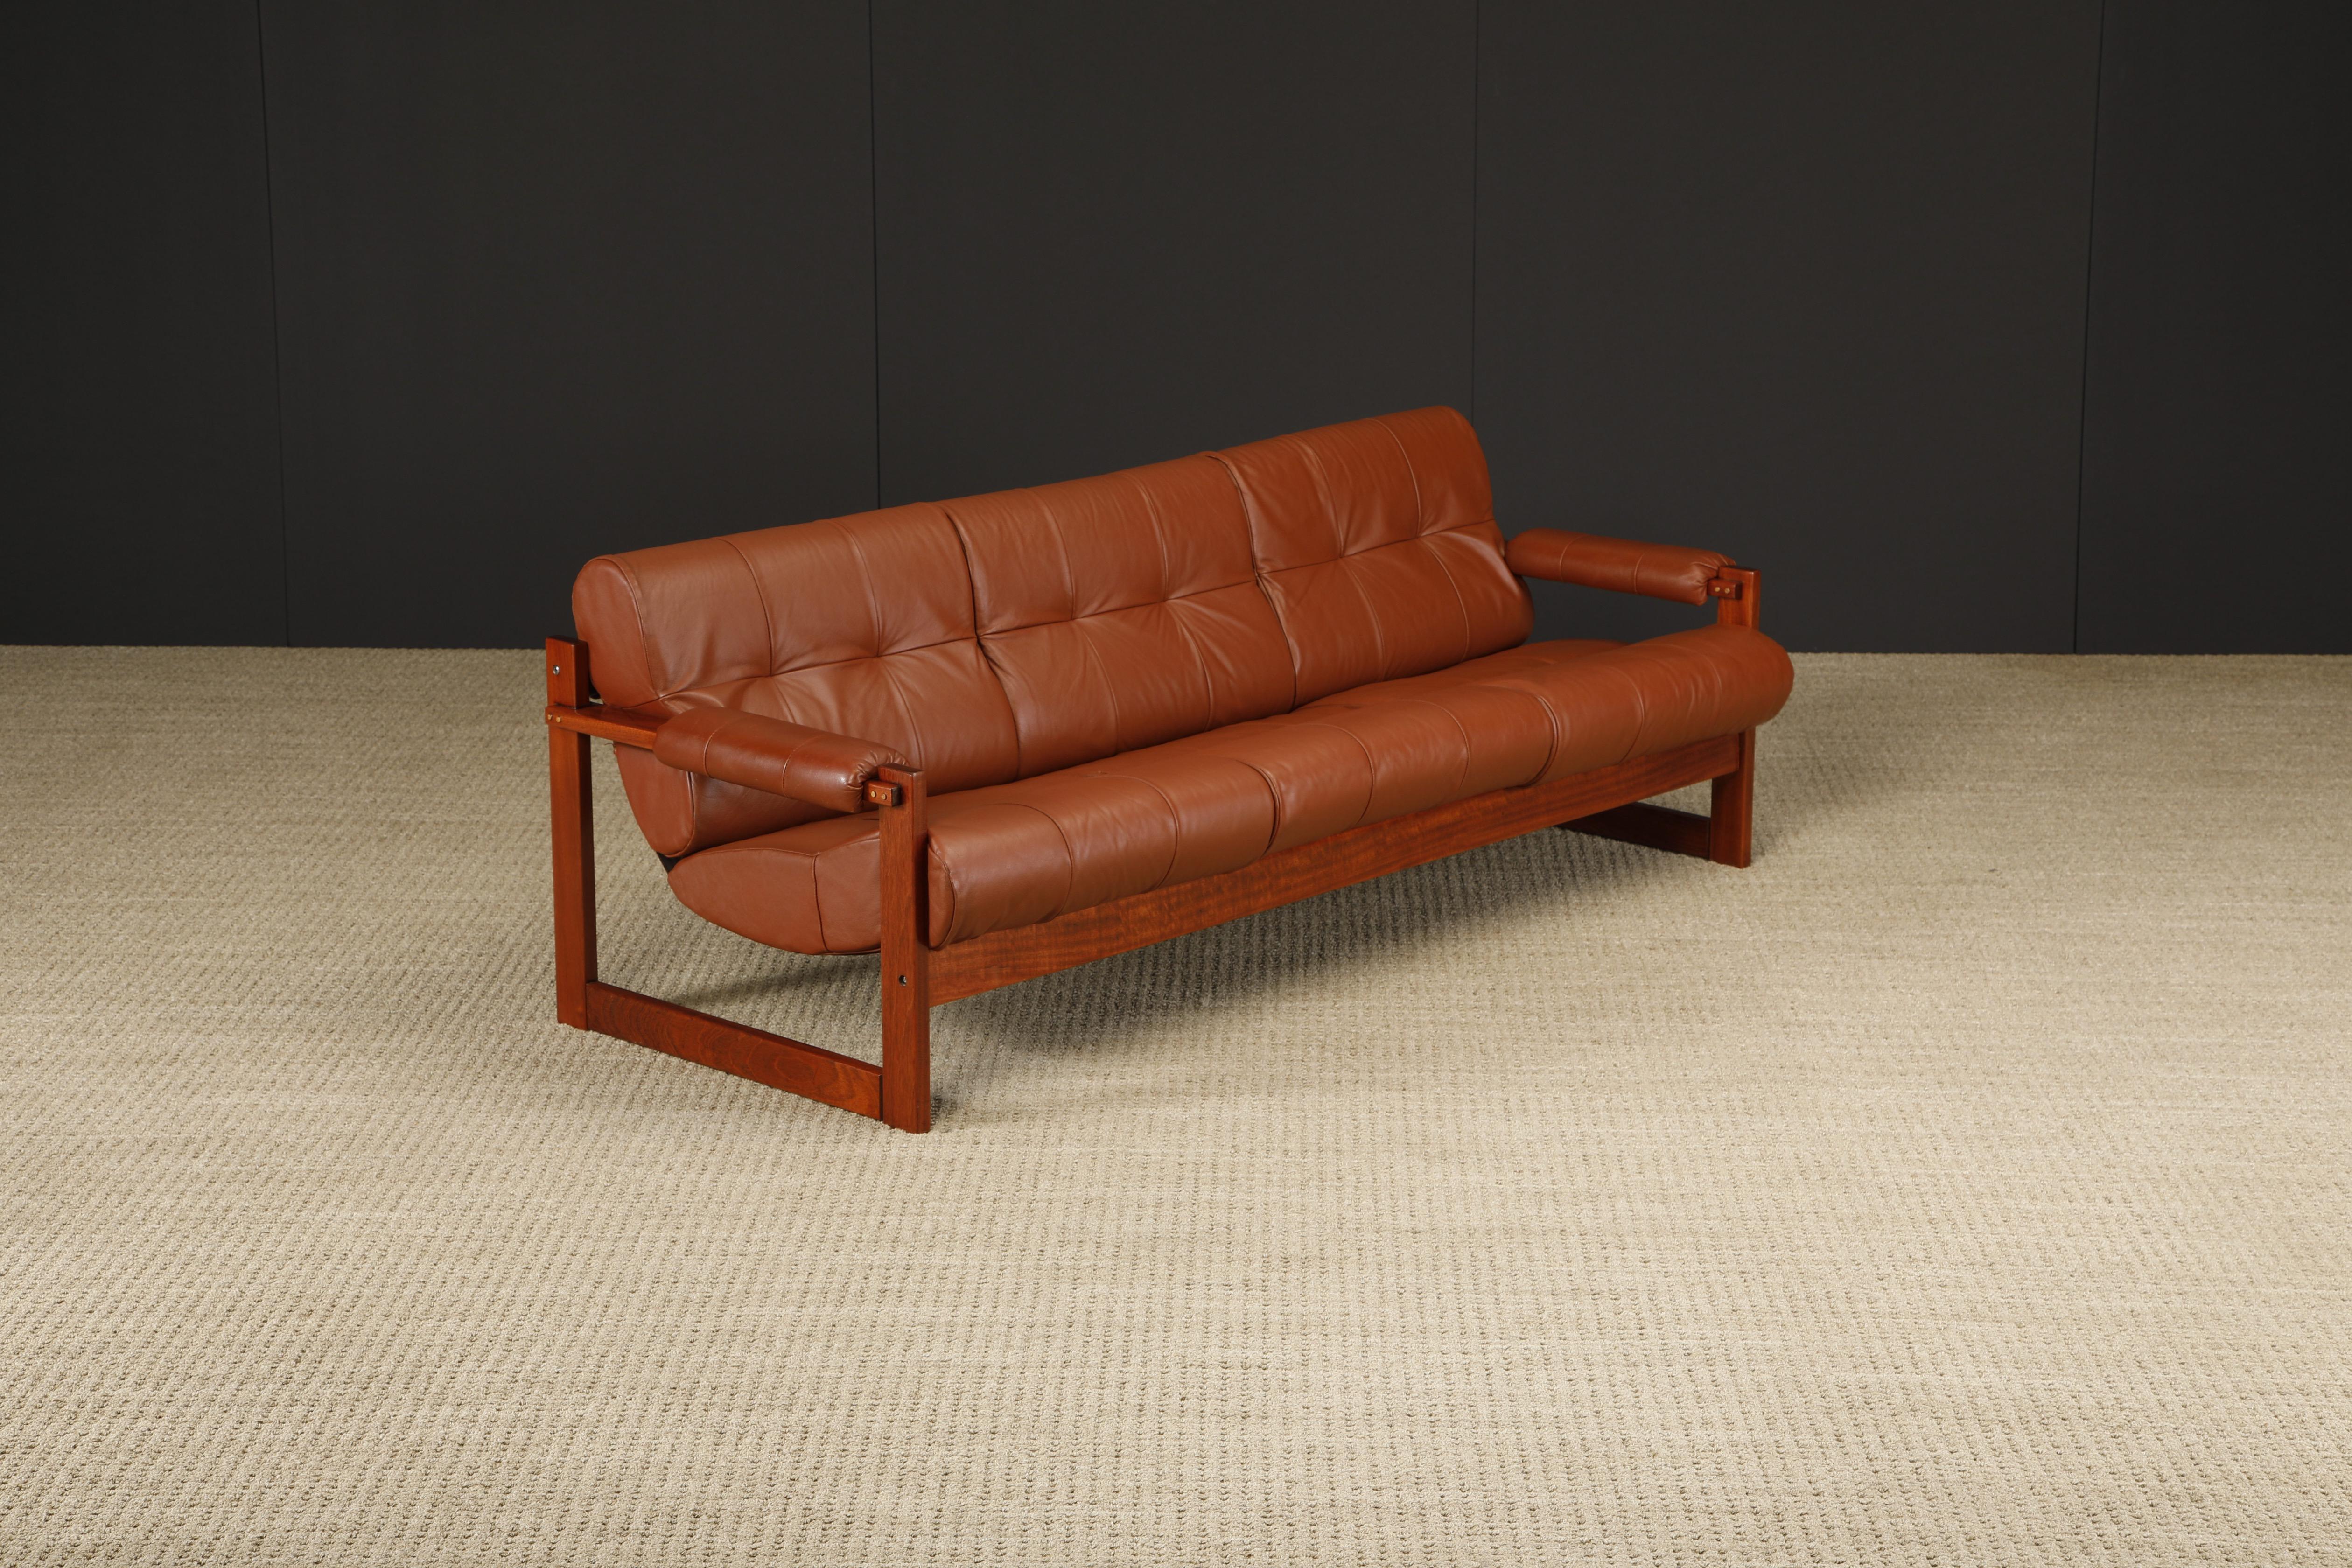 Brazilian Percival Lafer 'S-1' Rosewood and Leather Three Seat Sofa, Brazil, 1976, Signed